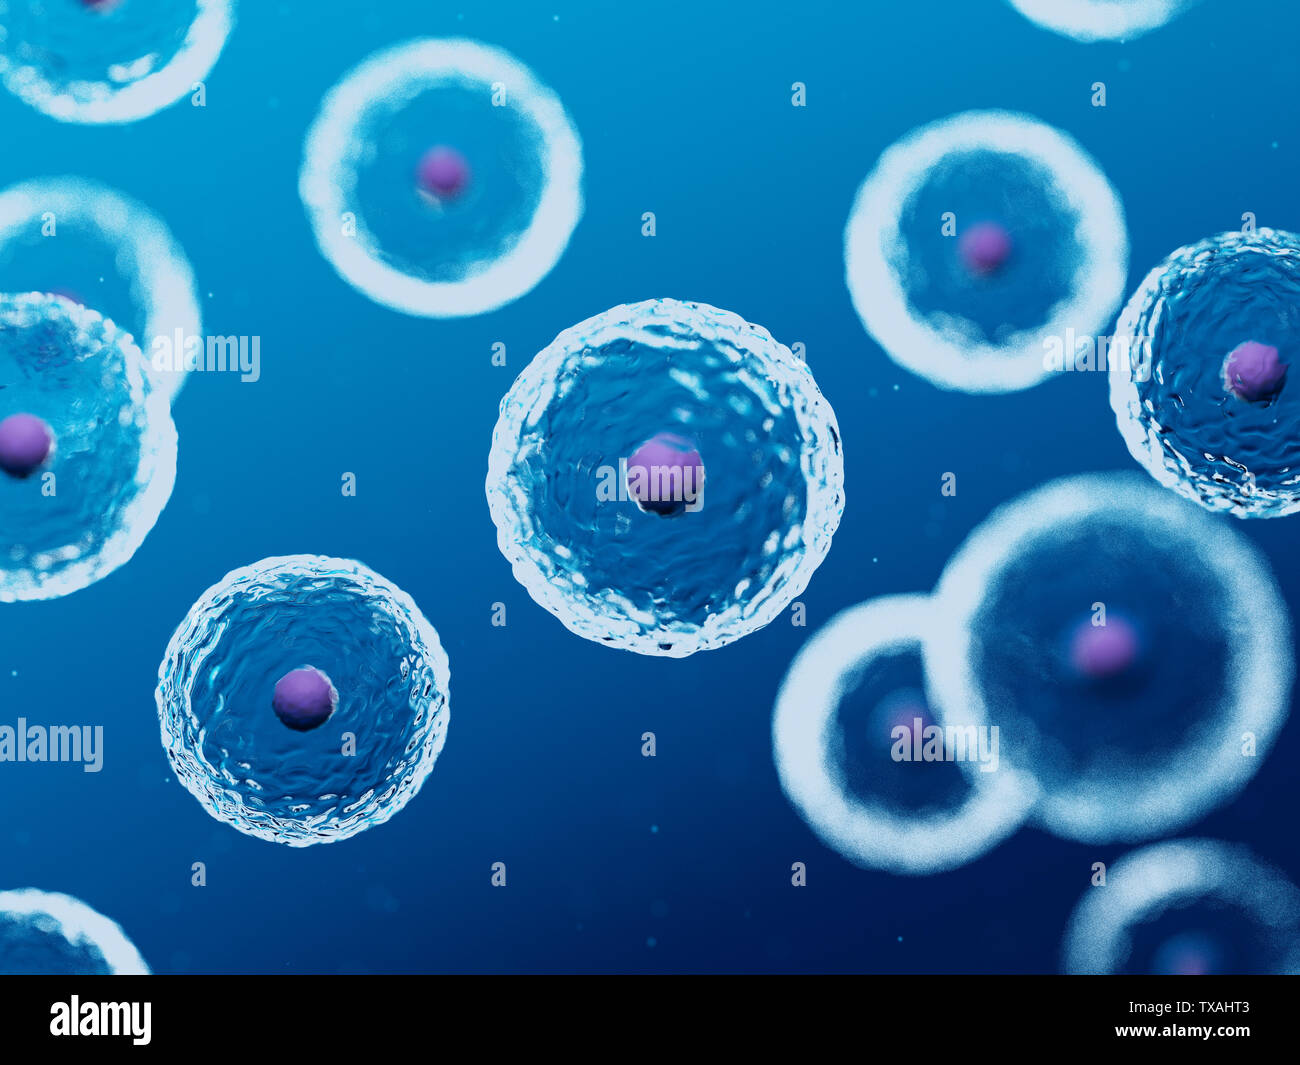 3d rendered medically accurate illustration of human cells Stock Photo